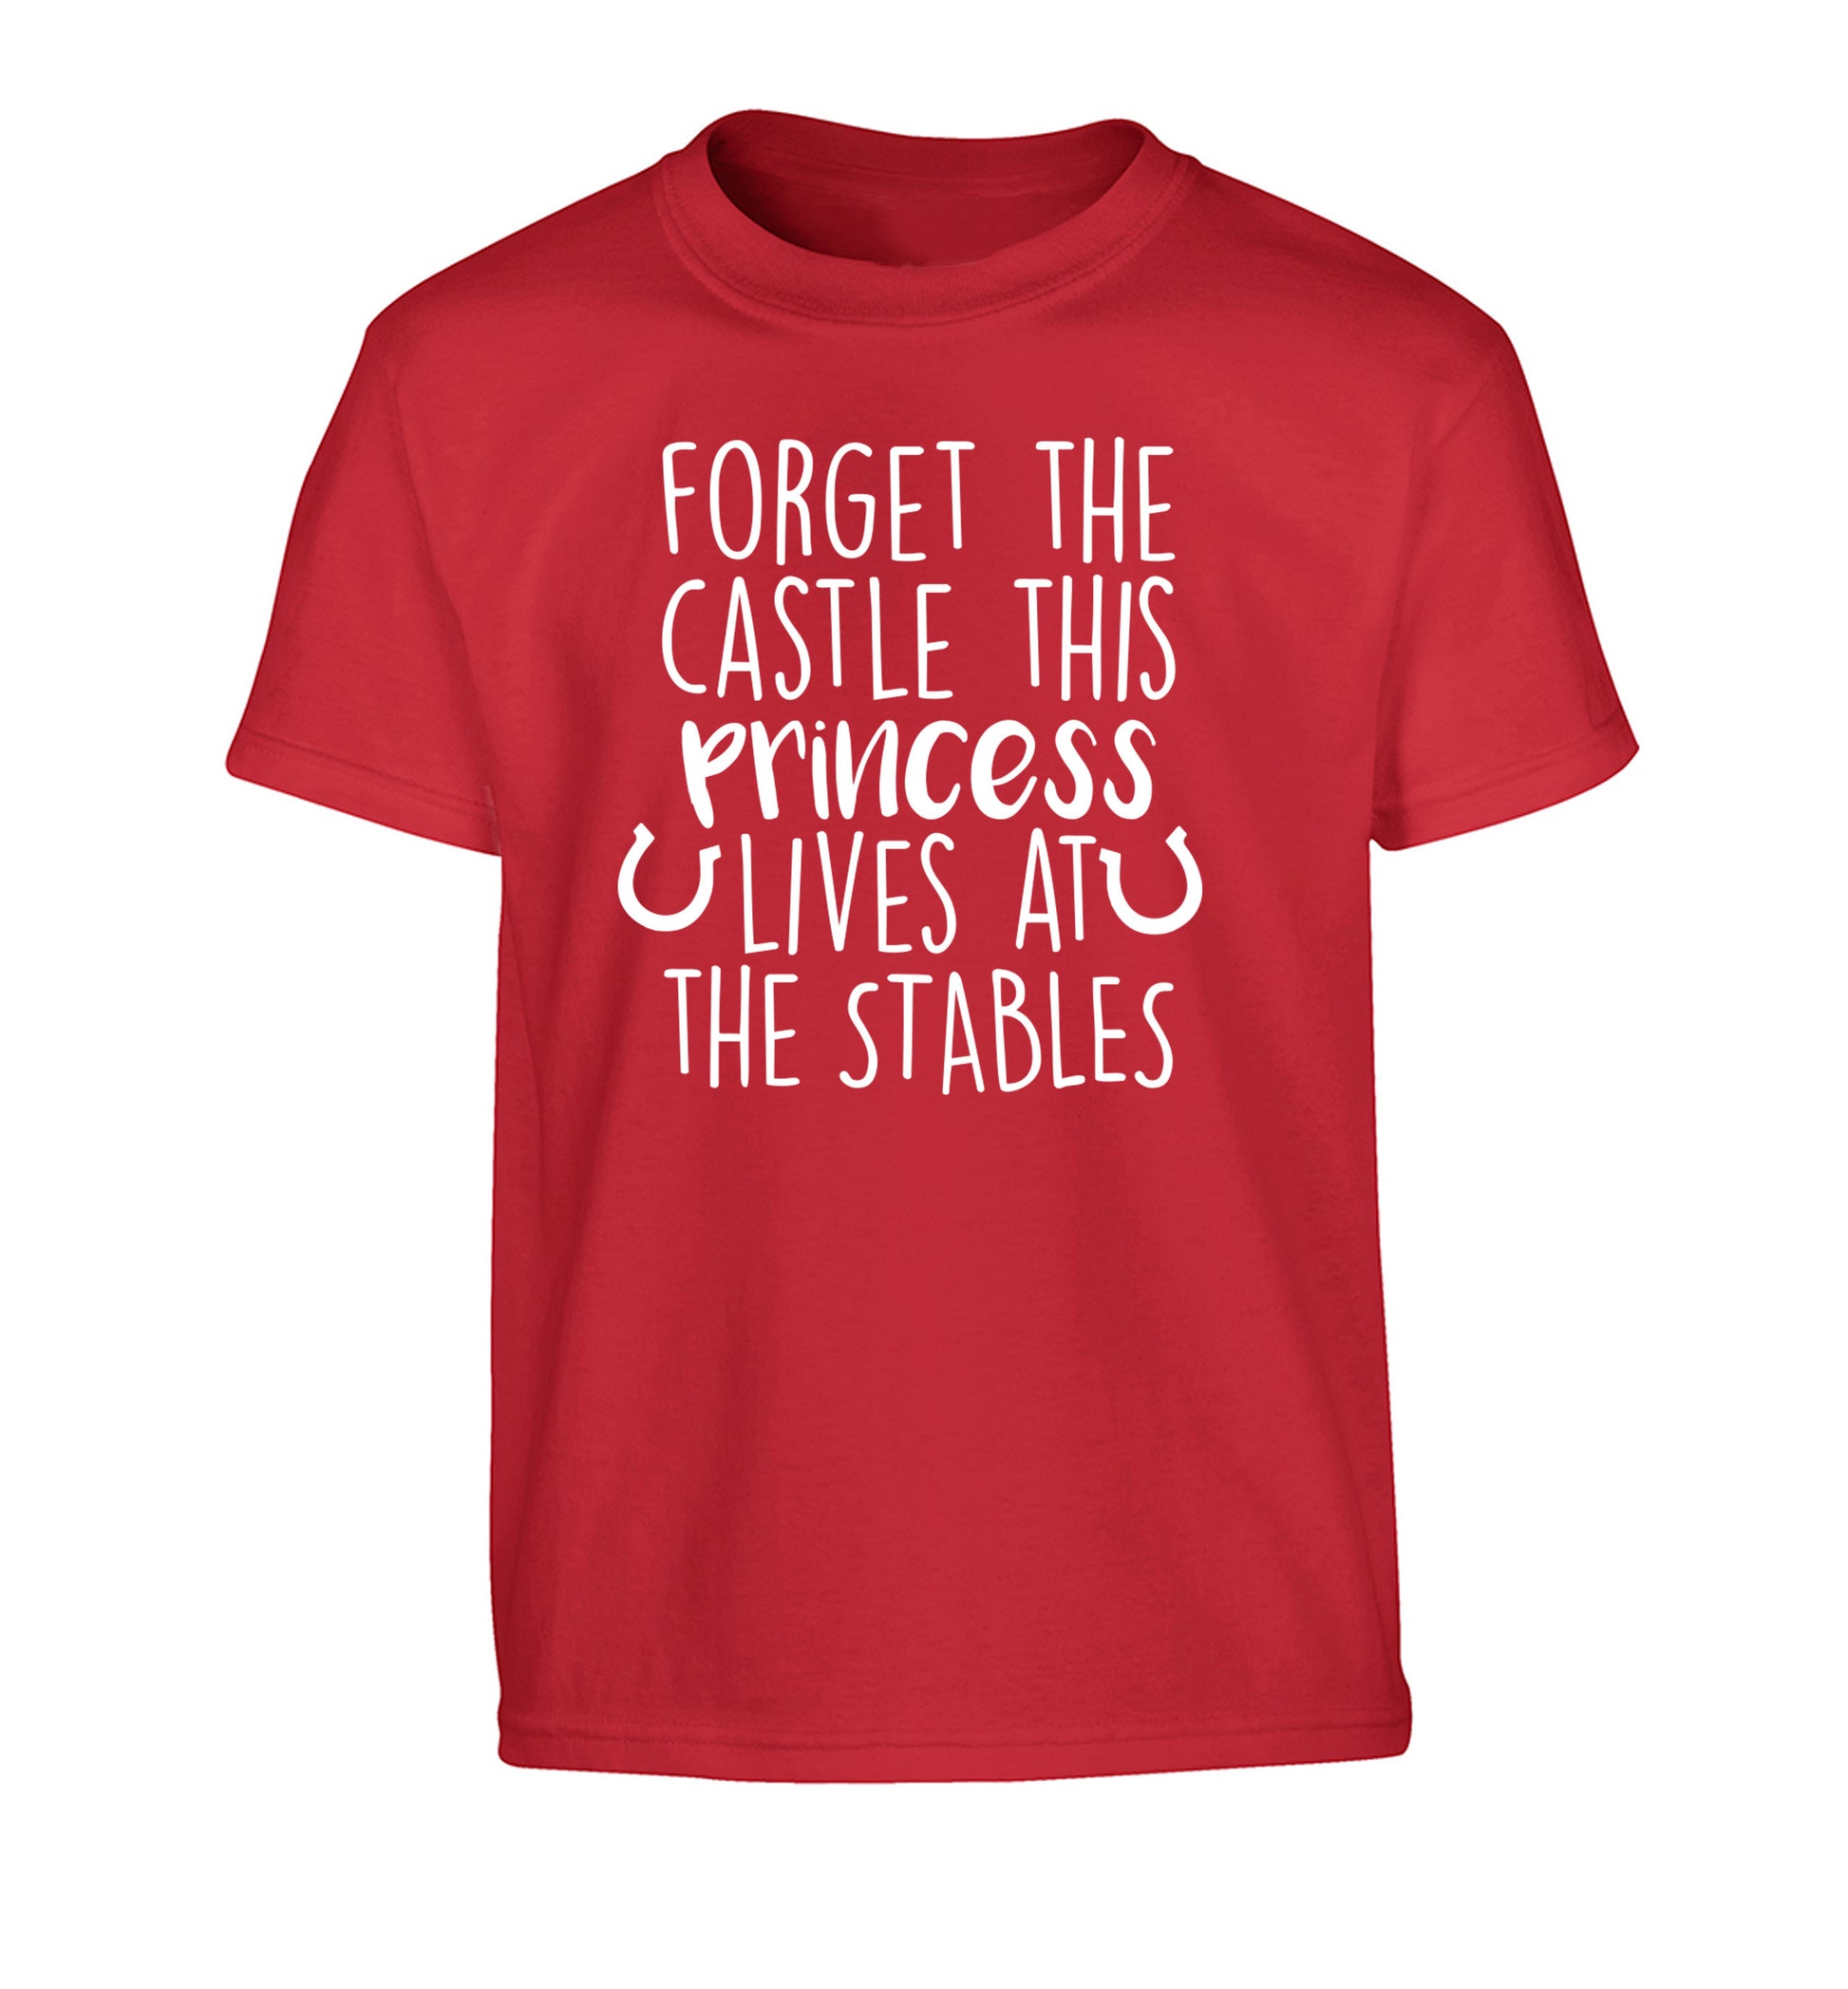 Forget the castle this princess lives at the stables Children's red Tshirt 12-14 Years